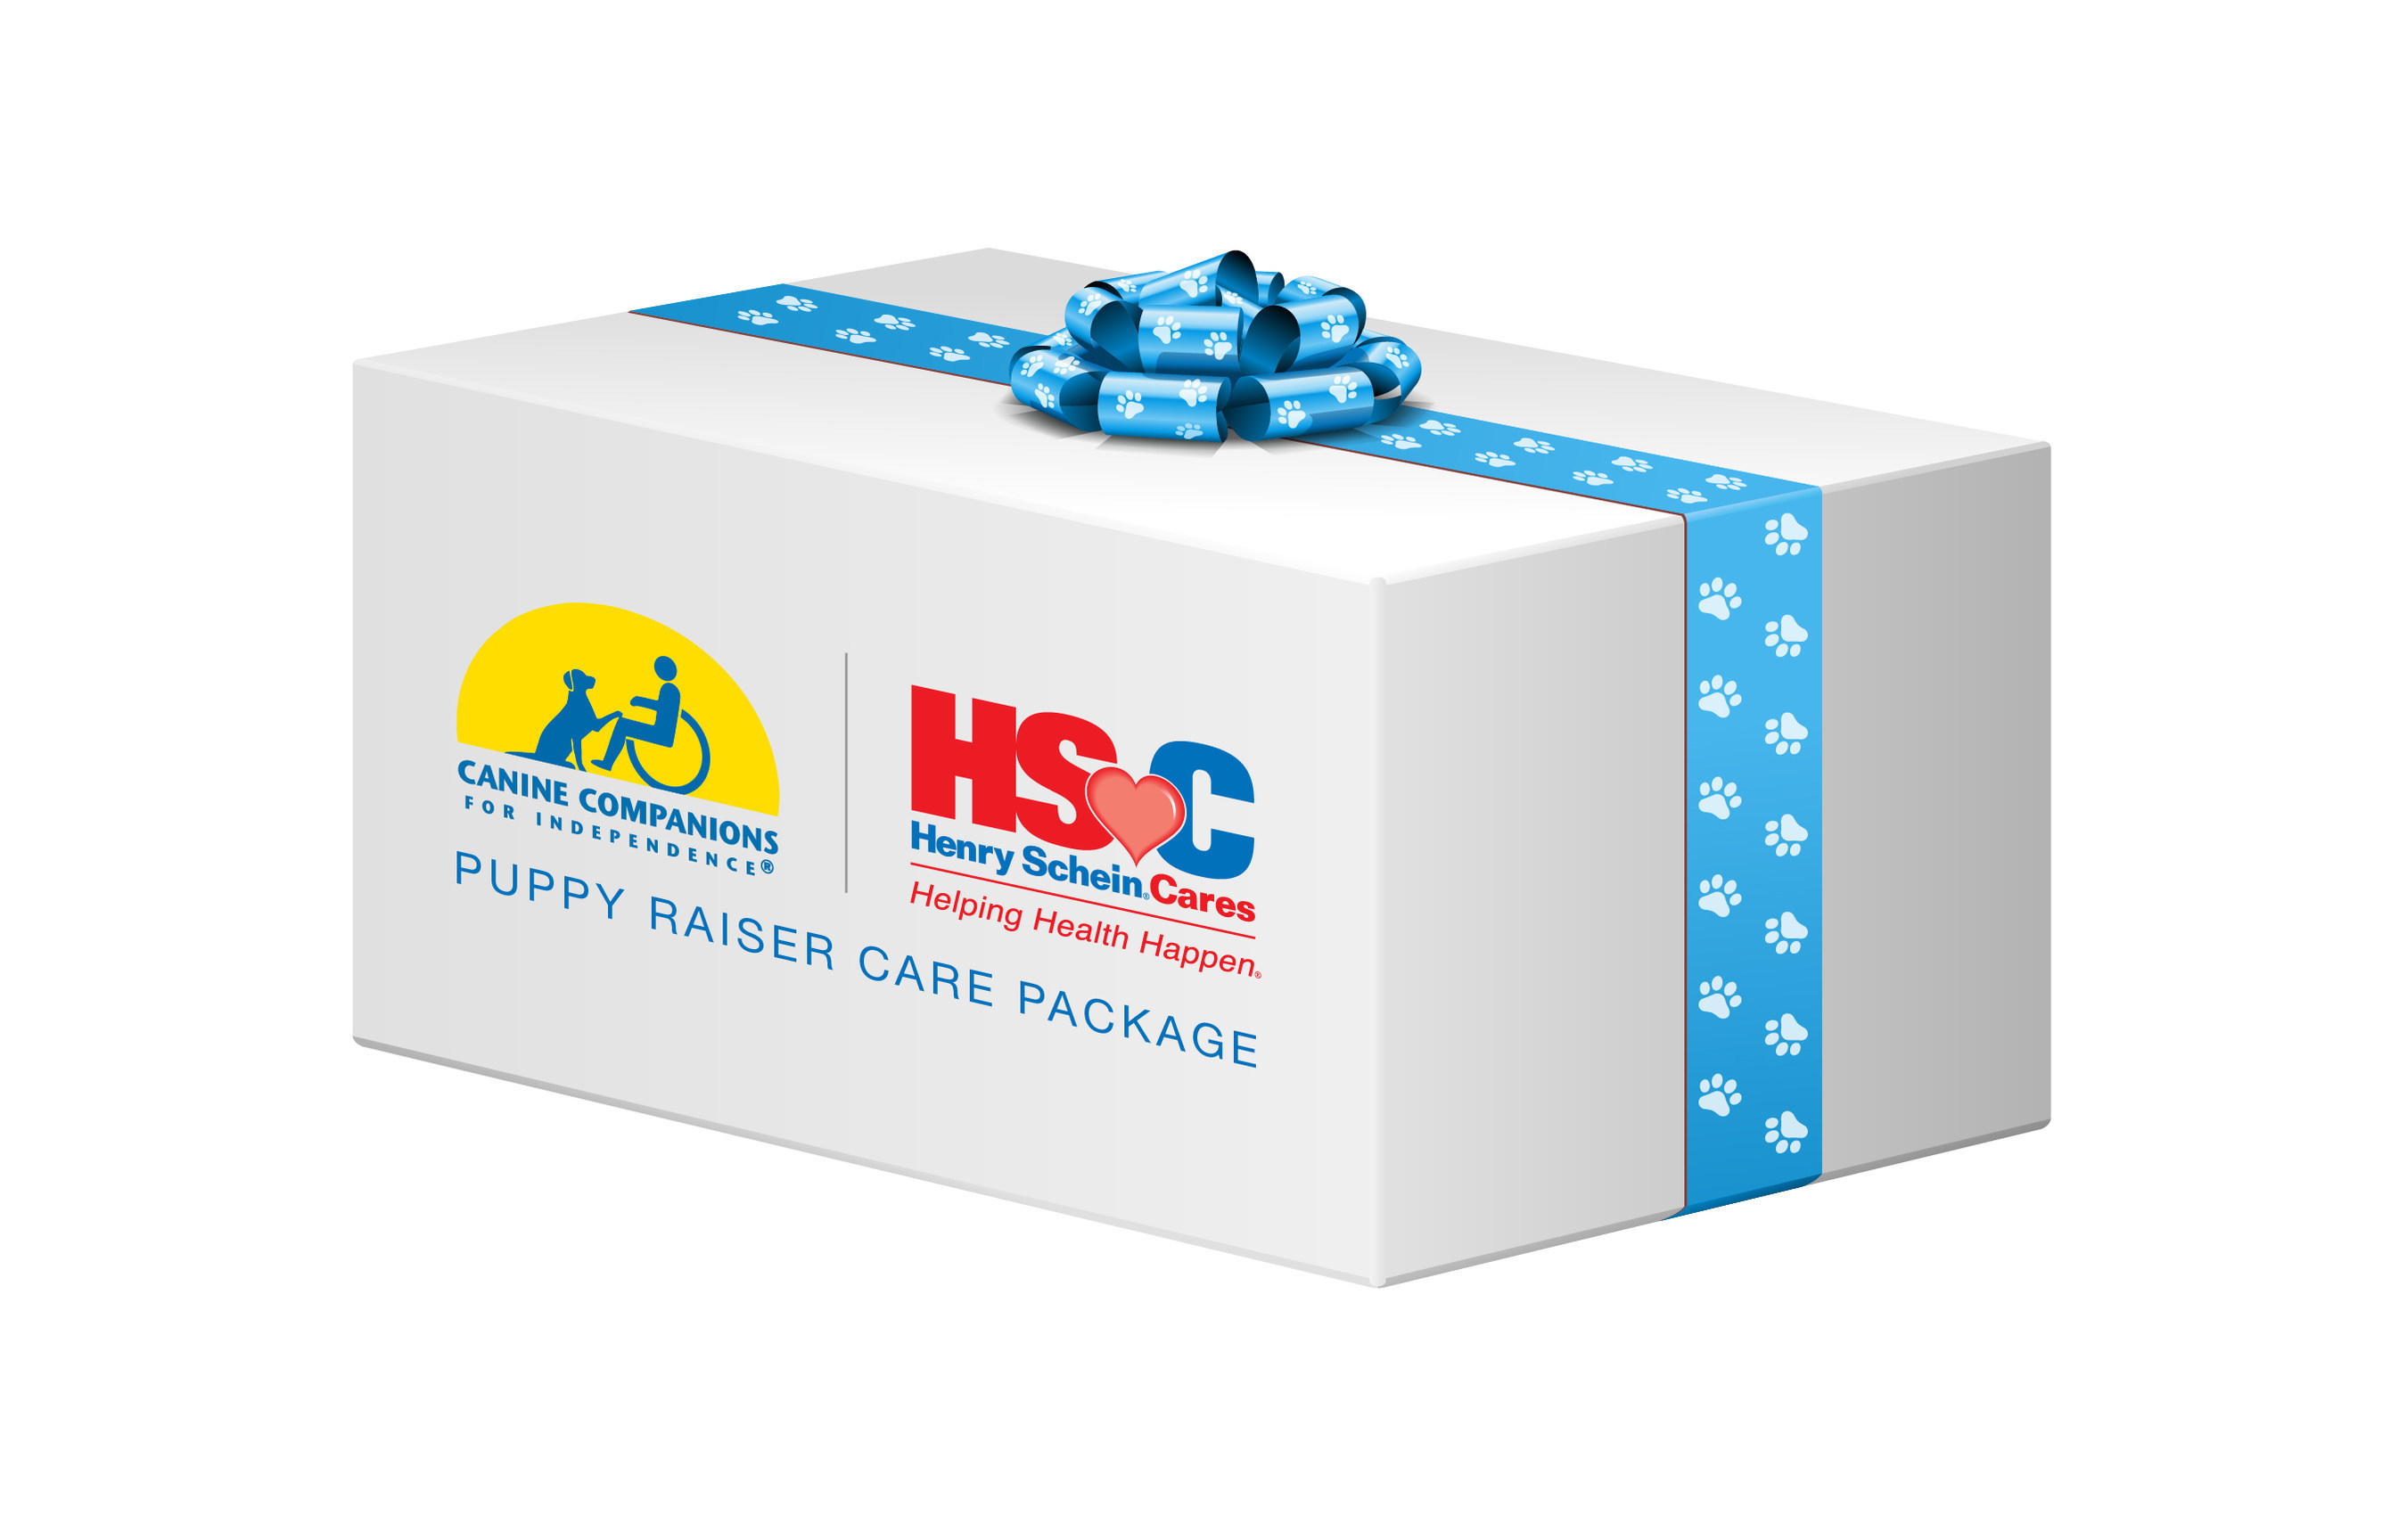 Henry Schein and Canine Companions for Independence form partnership to support 'puppy raisers' and their veterinarians. Starting this year, each Canine Companions 'puppy raiser' and the veterinarian who cares for the dog will receive a "Henry Schein Cares-Canine Companions Puppy Raiser Care Package" stocked with the products essential for raising the puppy during the first 18 months of life. By helping defray the cost the volunteer incurs in raising the puppy, Henry Schein and Canine Companions are working together to improve the lives of those with physical disabilities.